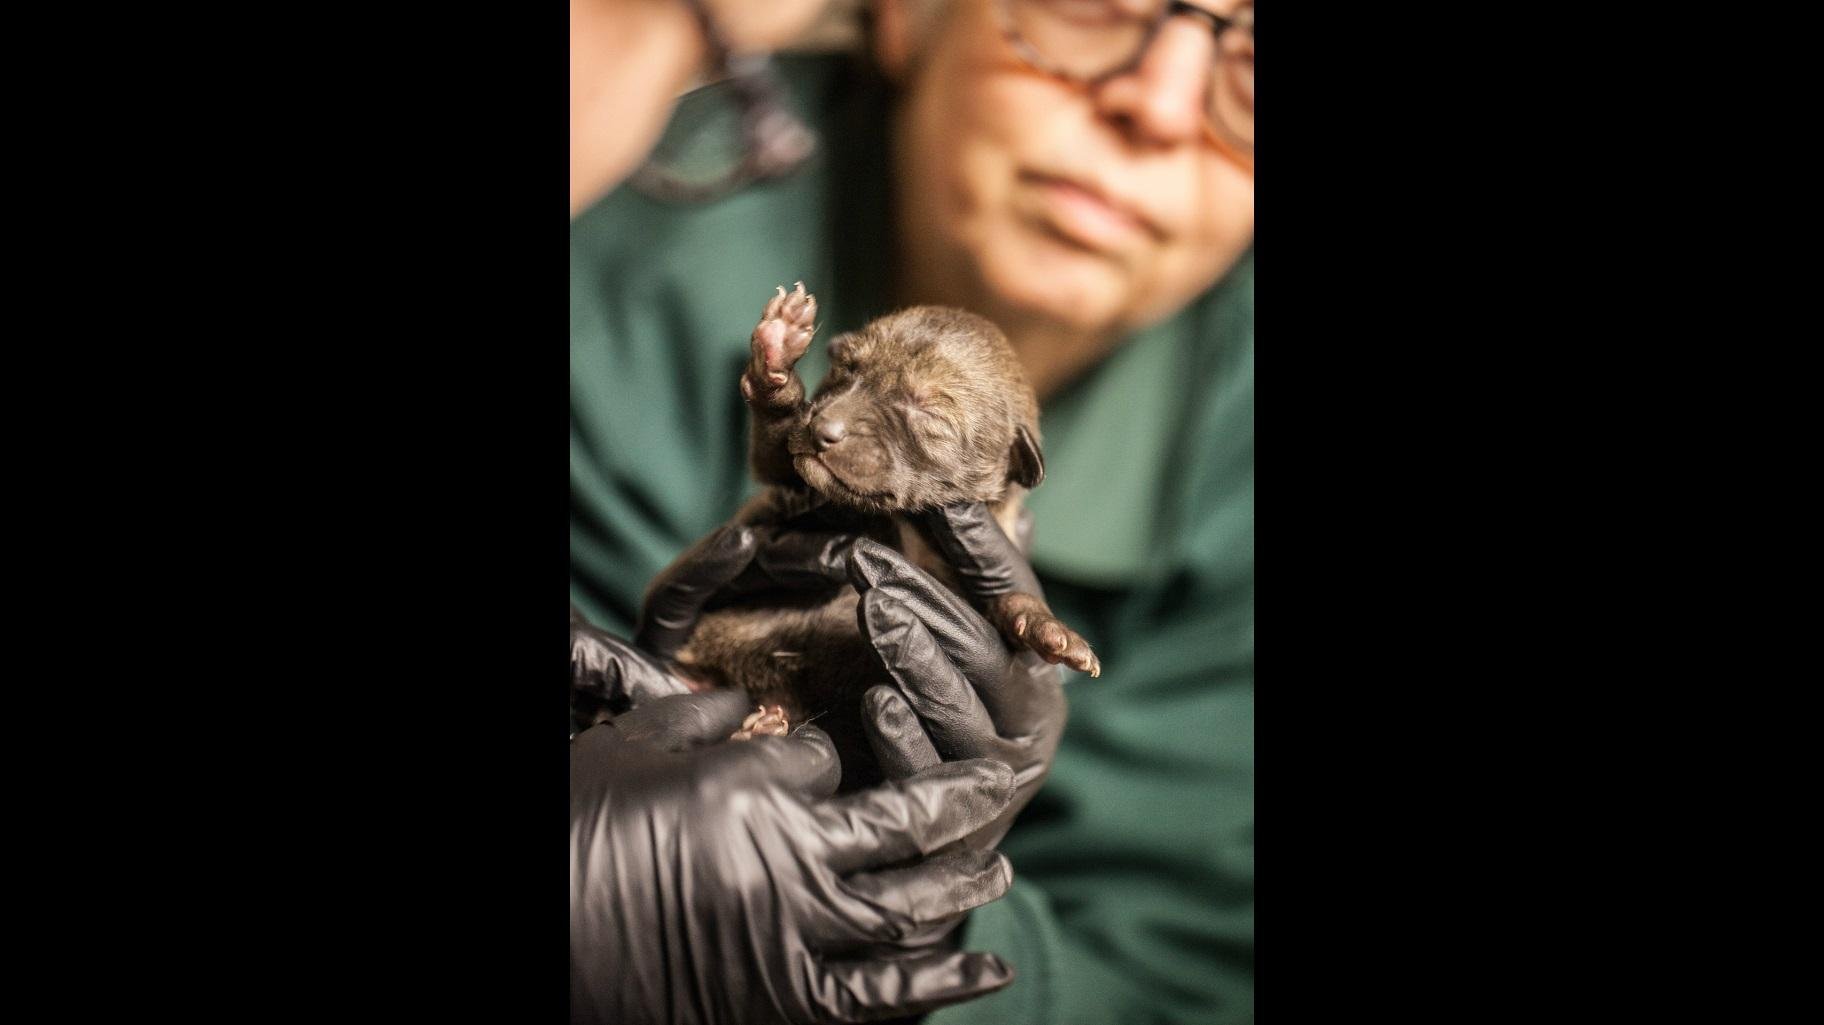 Red wolf pups like this newborn cub at Lincoln Park Zoo usually remain in the den for their first month as they nurse and gain strength. (Christopher Bijalba / Lincoln Park Zoo)